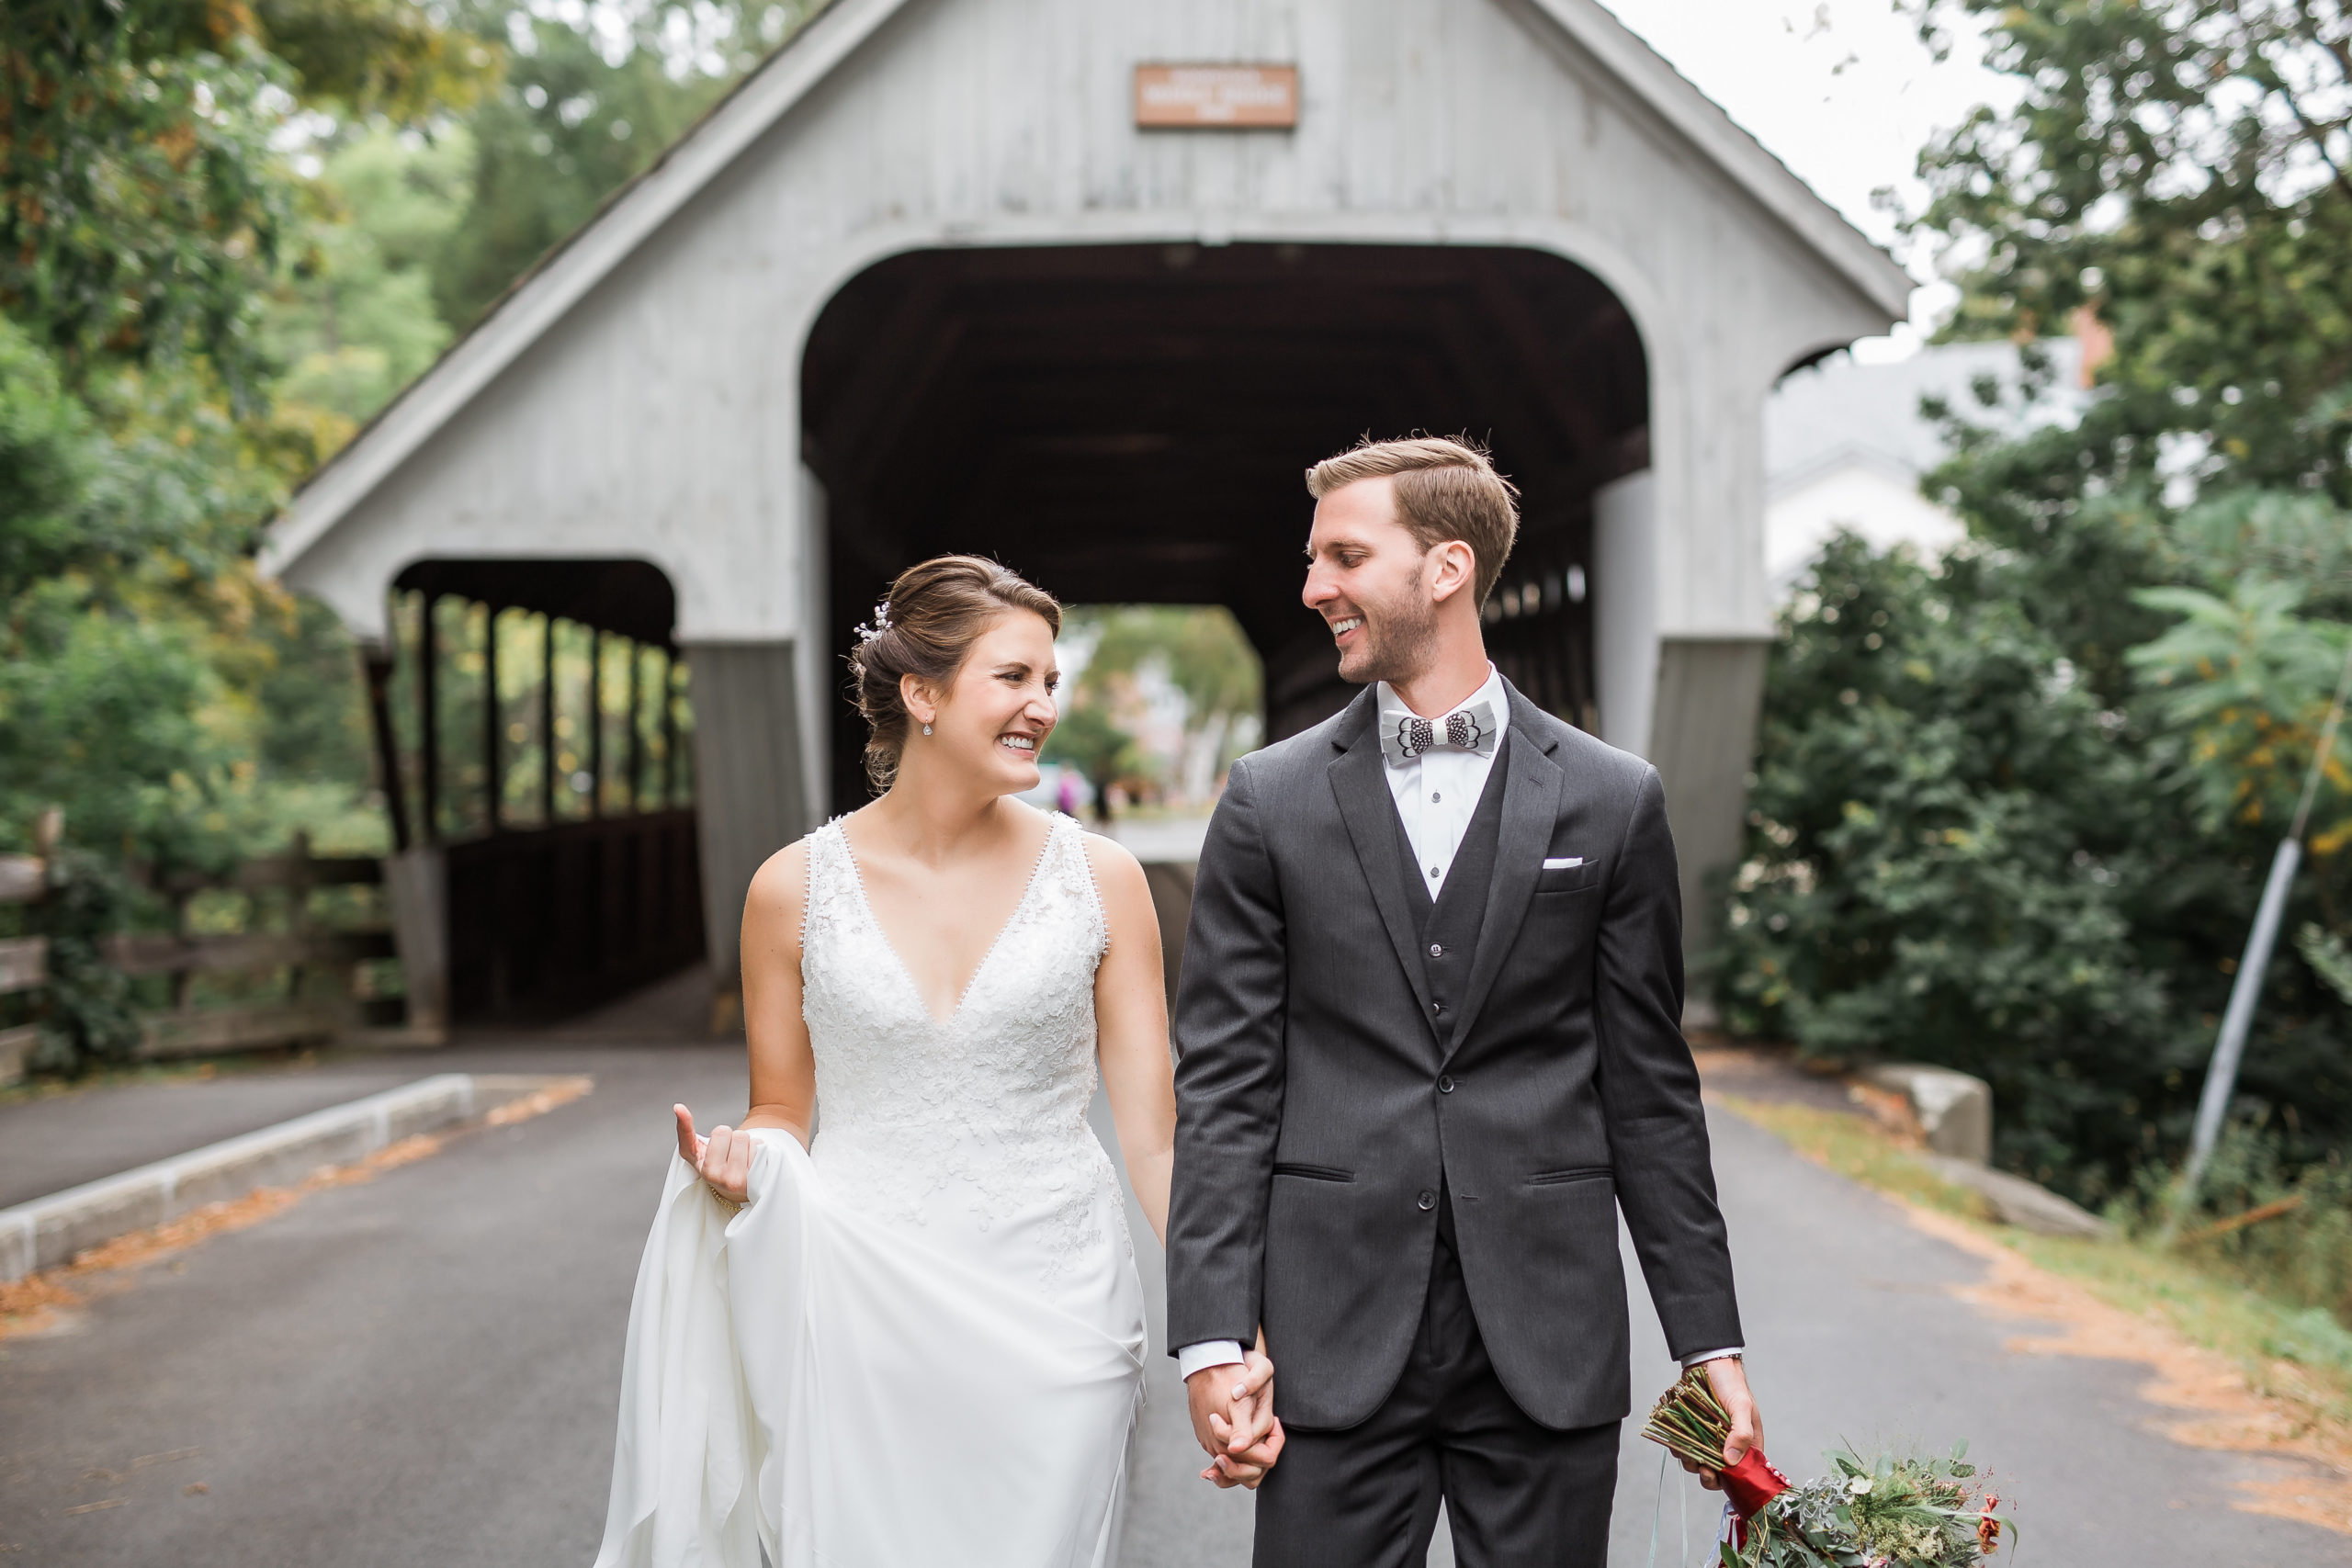 Lindsey And Ryan At Their Woodstock Vermont Wedding.